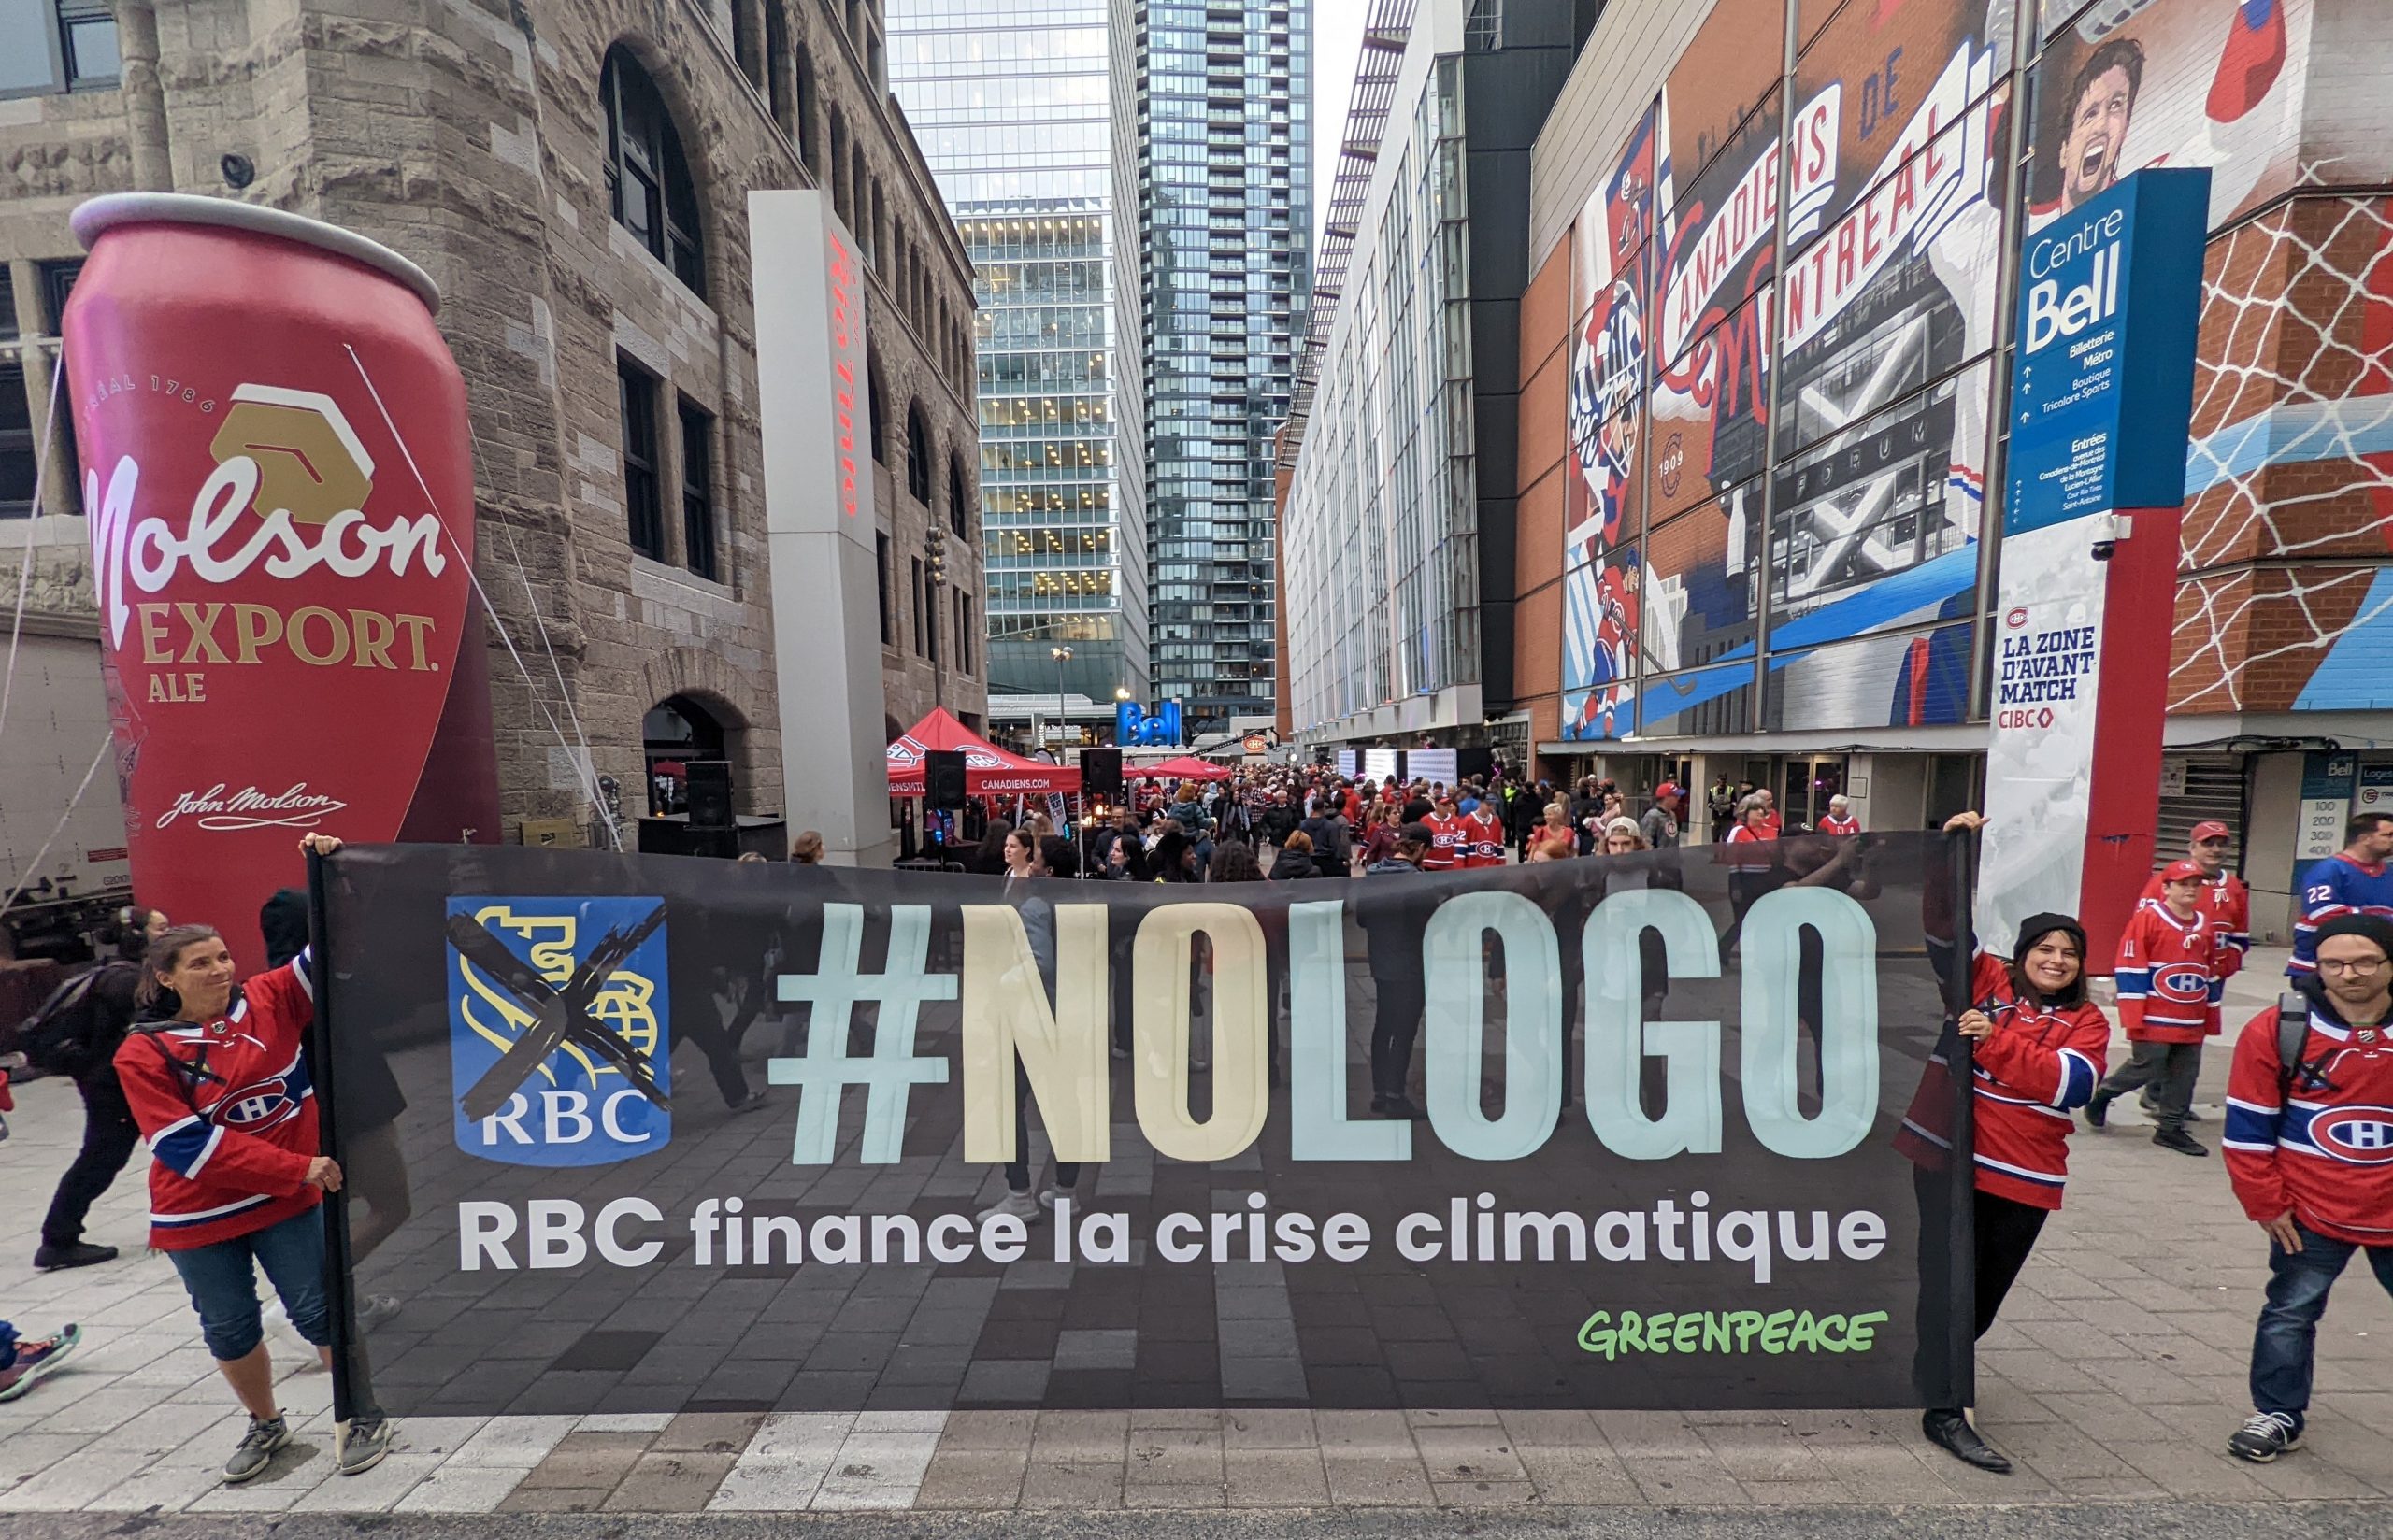 Protesters in quebec protest RBC after greenwashing investigation